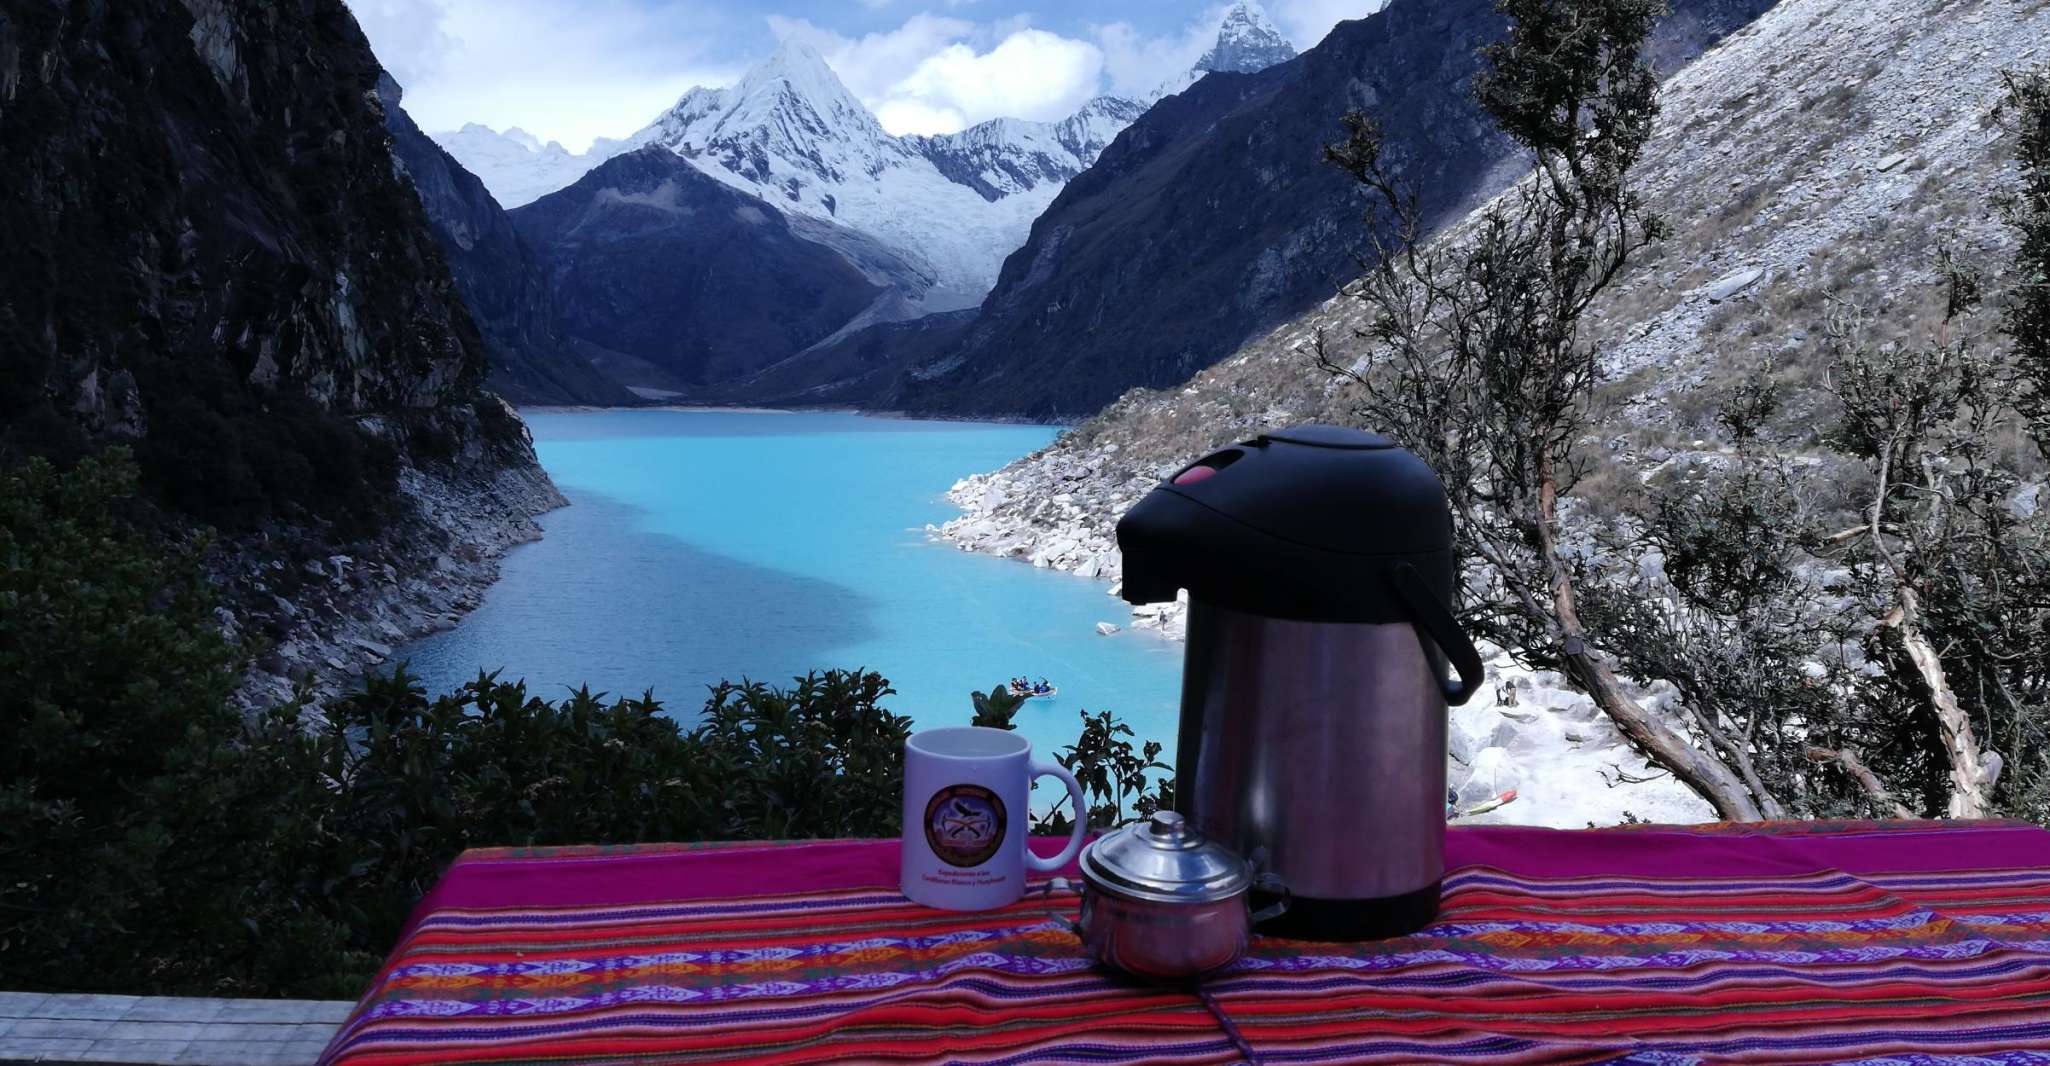 Huaraz, Full-day Tour to Lake Parón with Optional Lunch - Housity